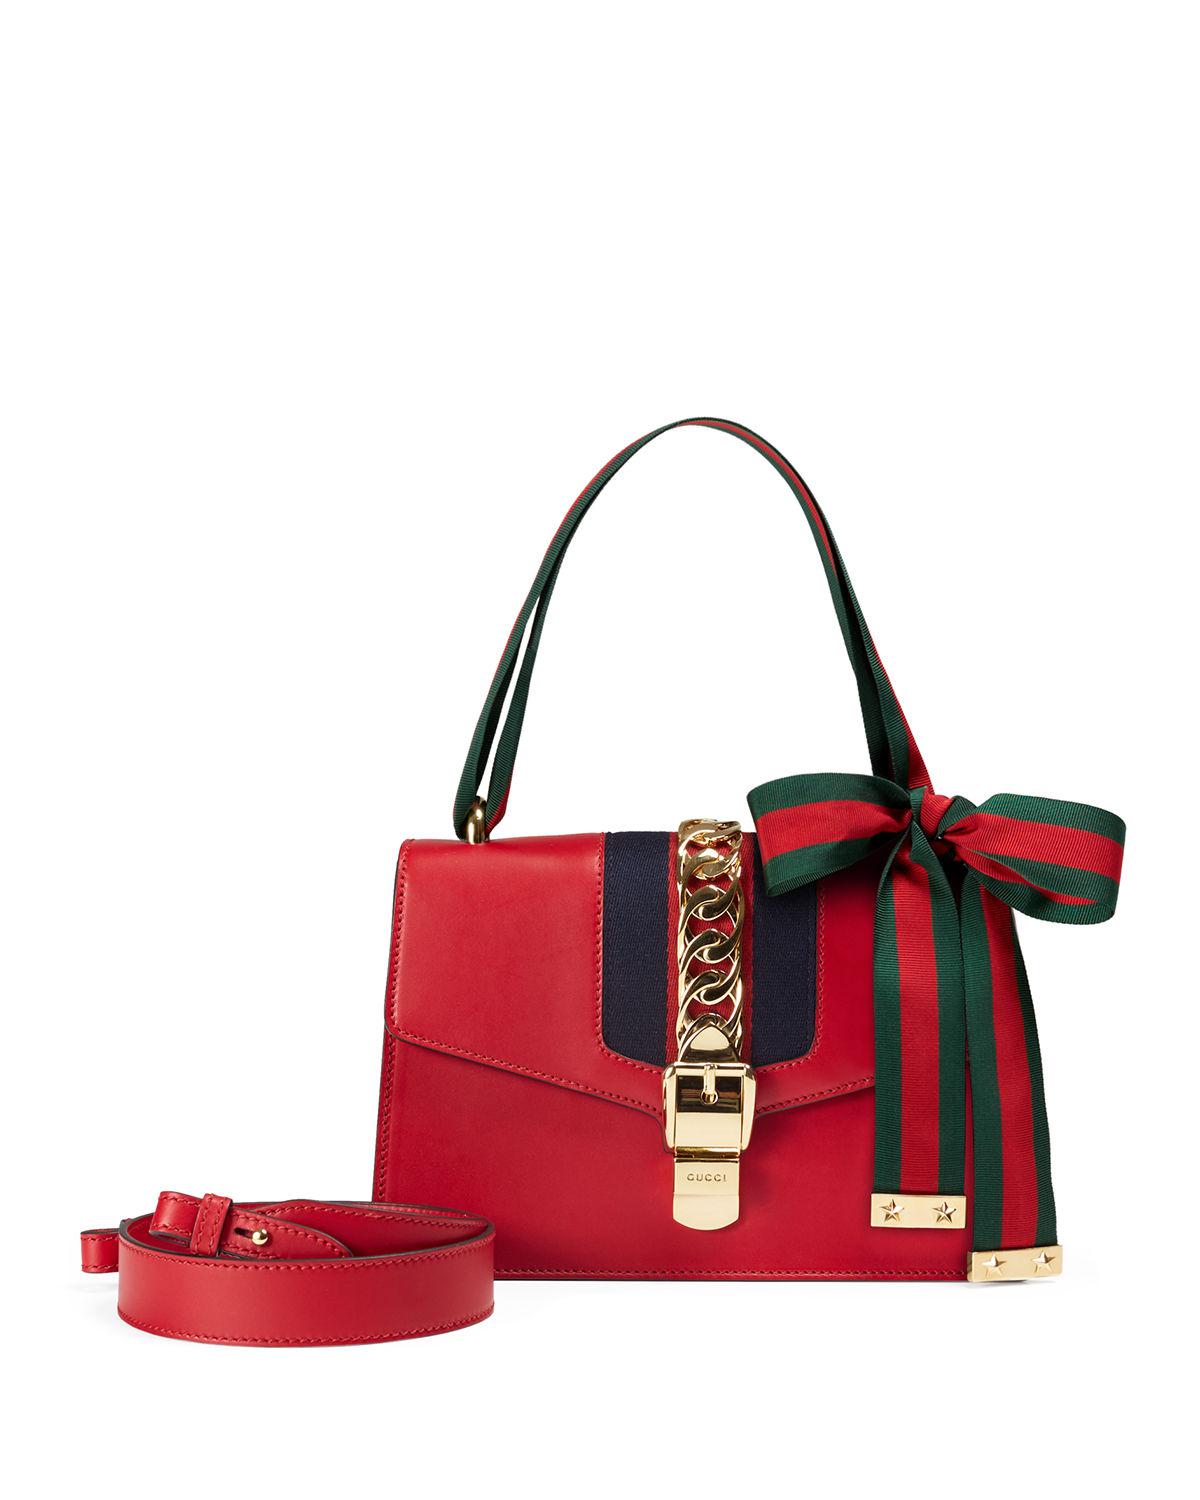 Gucci Sylvie Small Leather Shoulder Bag in Red - Lyst